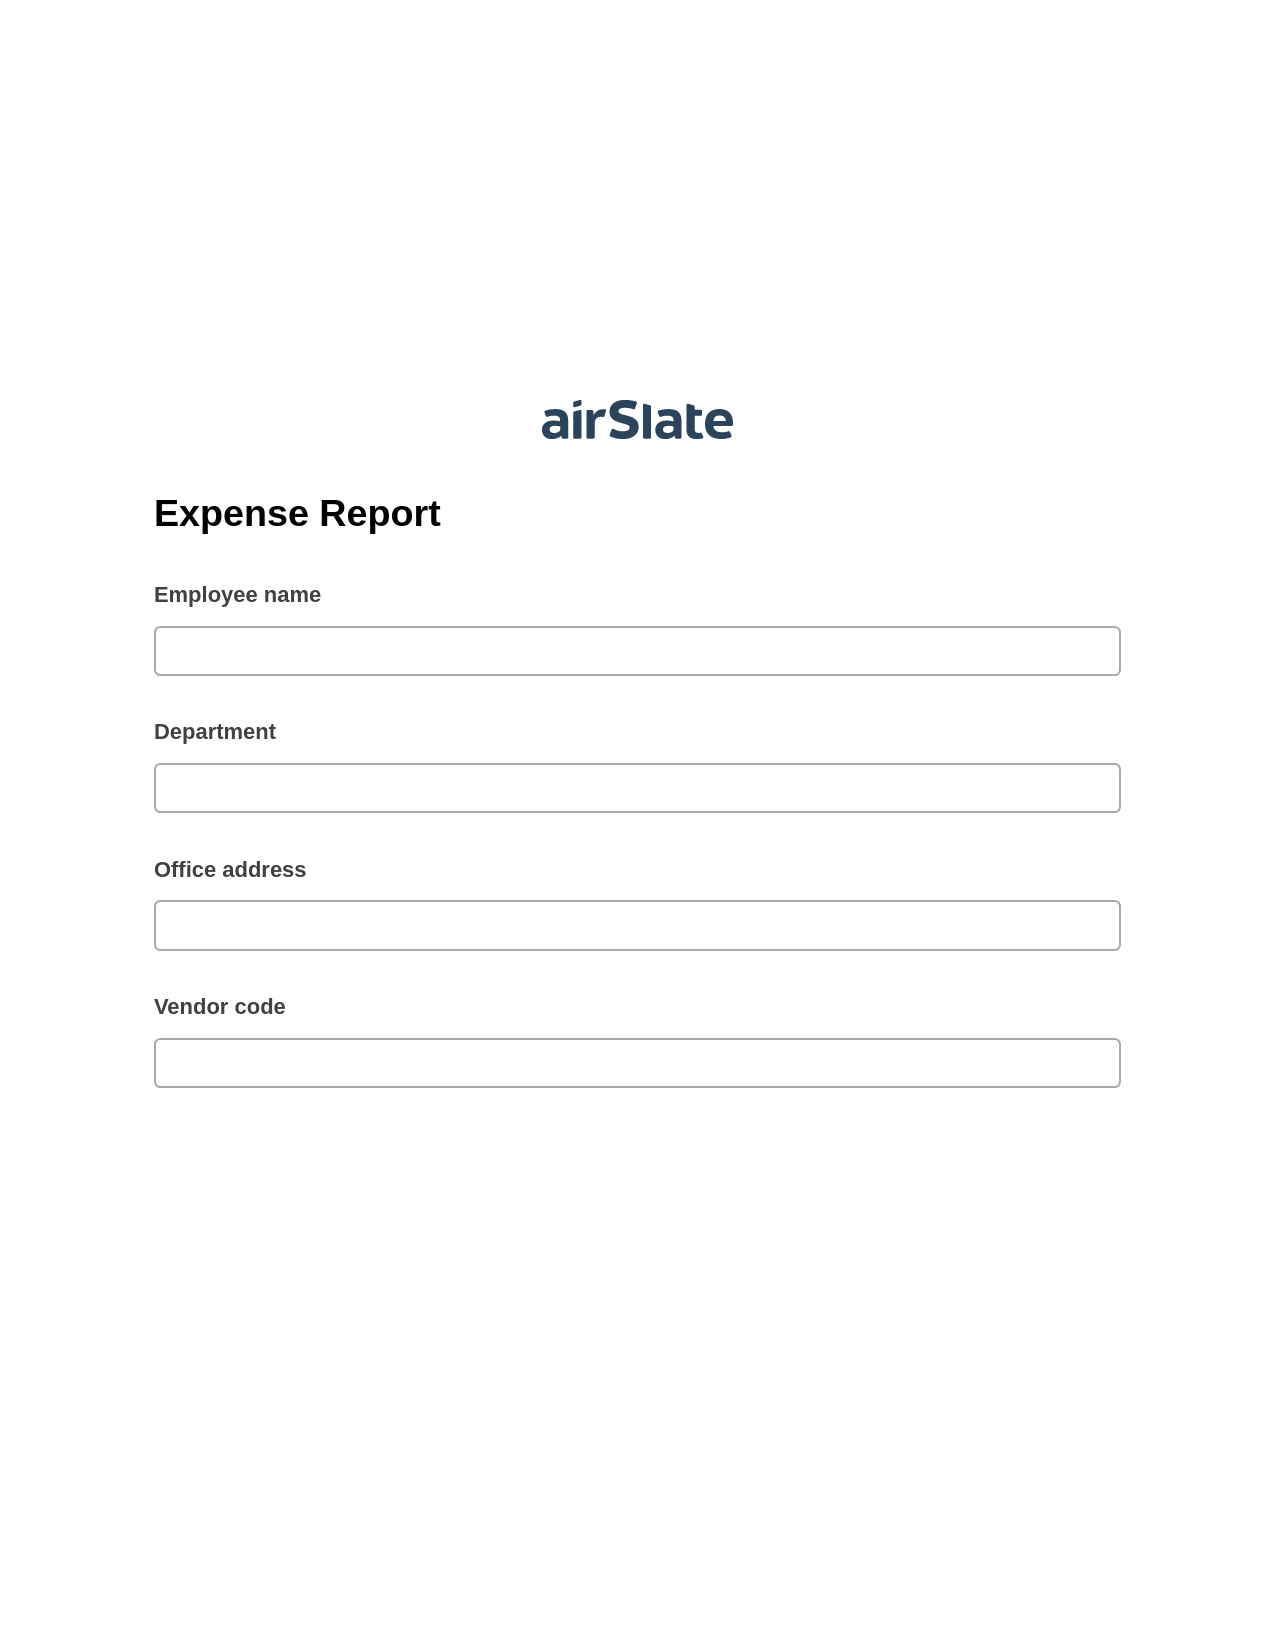 Multirole Expense Report Pre-fill Document Bot, Export to MS Dynamics 365 Bot, Archive to SharePoint Folder Bot